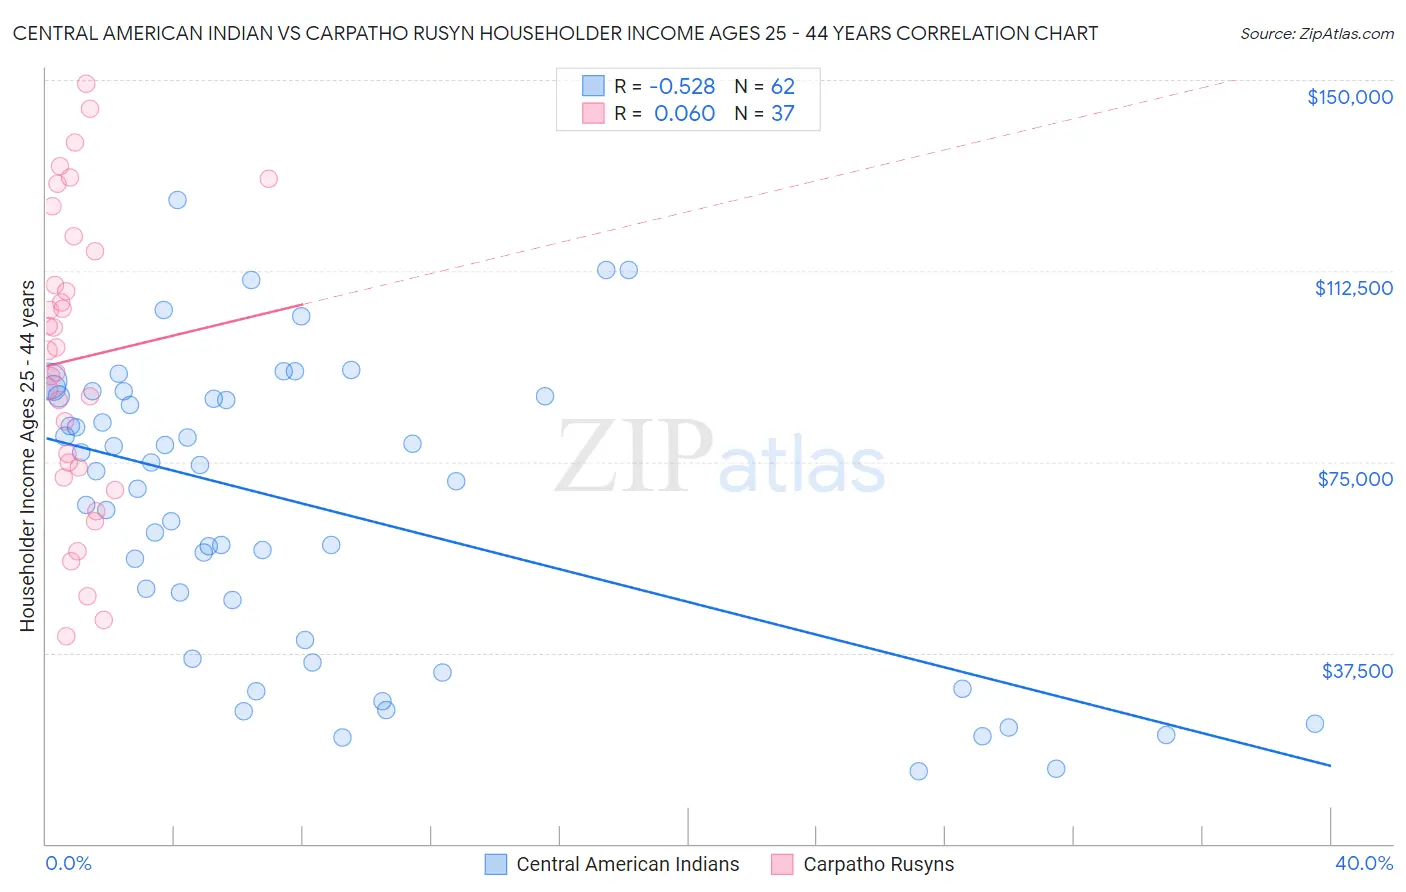 Central American Indian vs Carpatho Rusyn Householder Income Ages 25 - 44 years